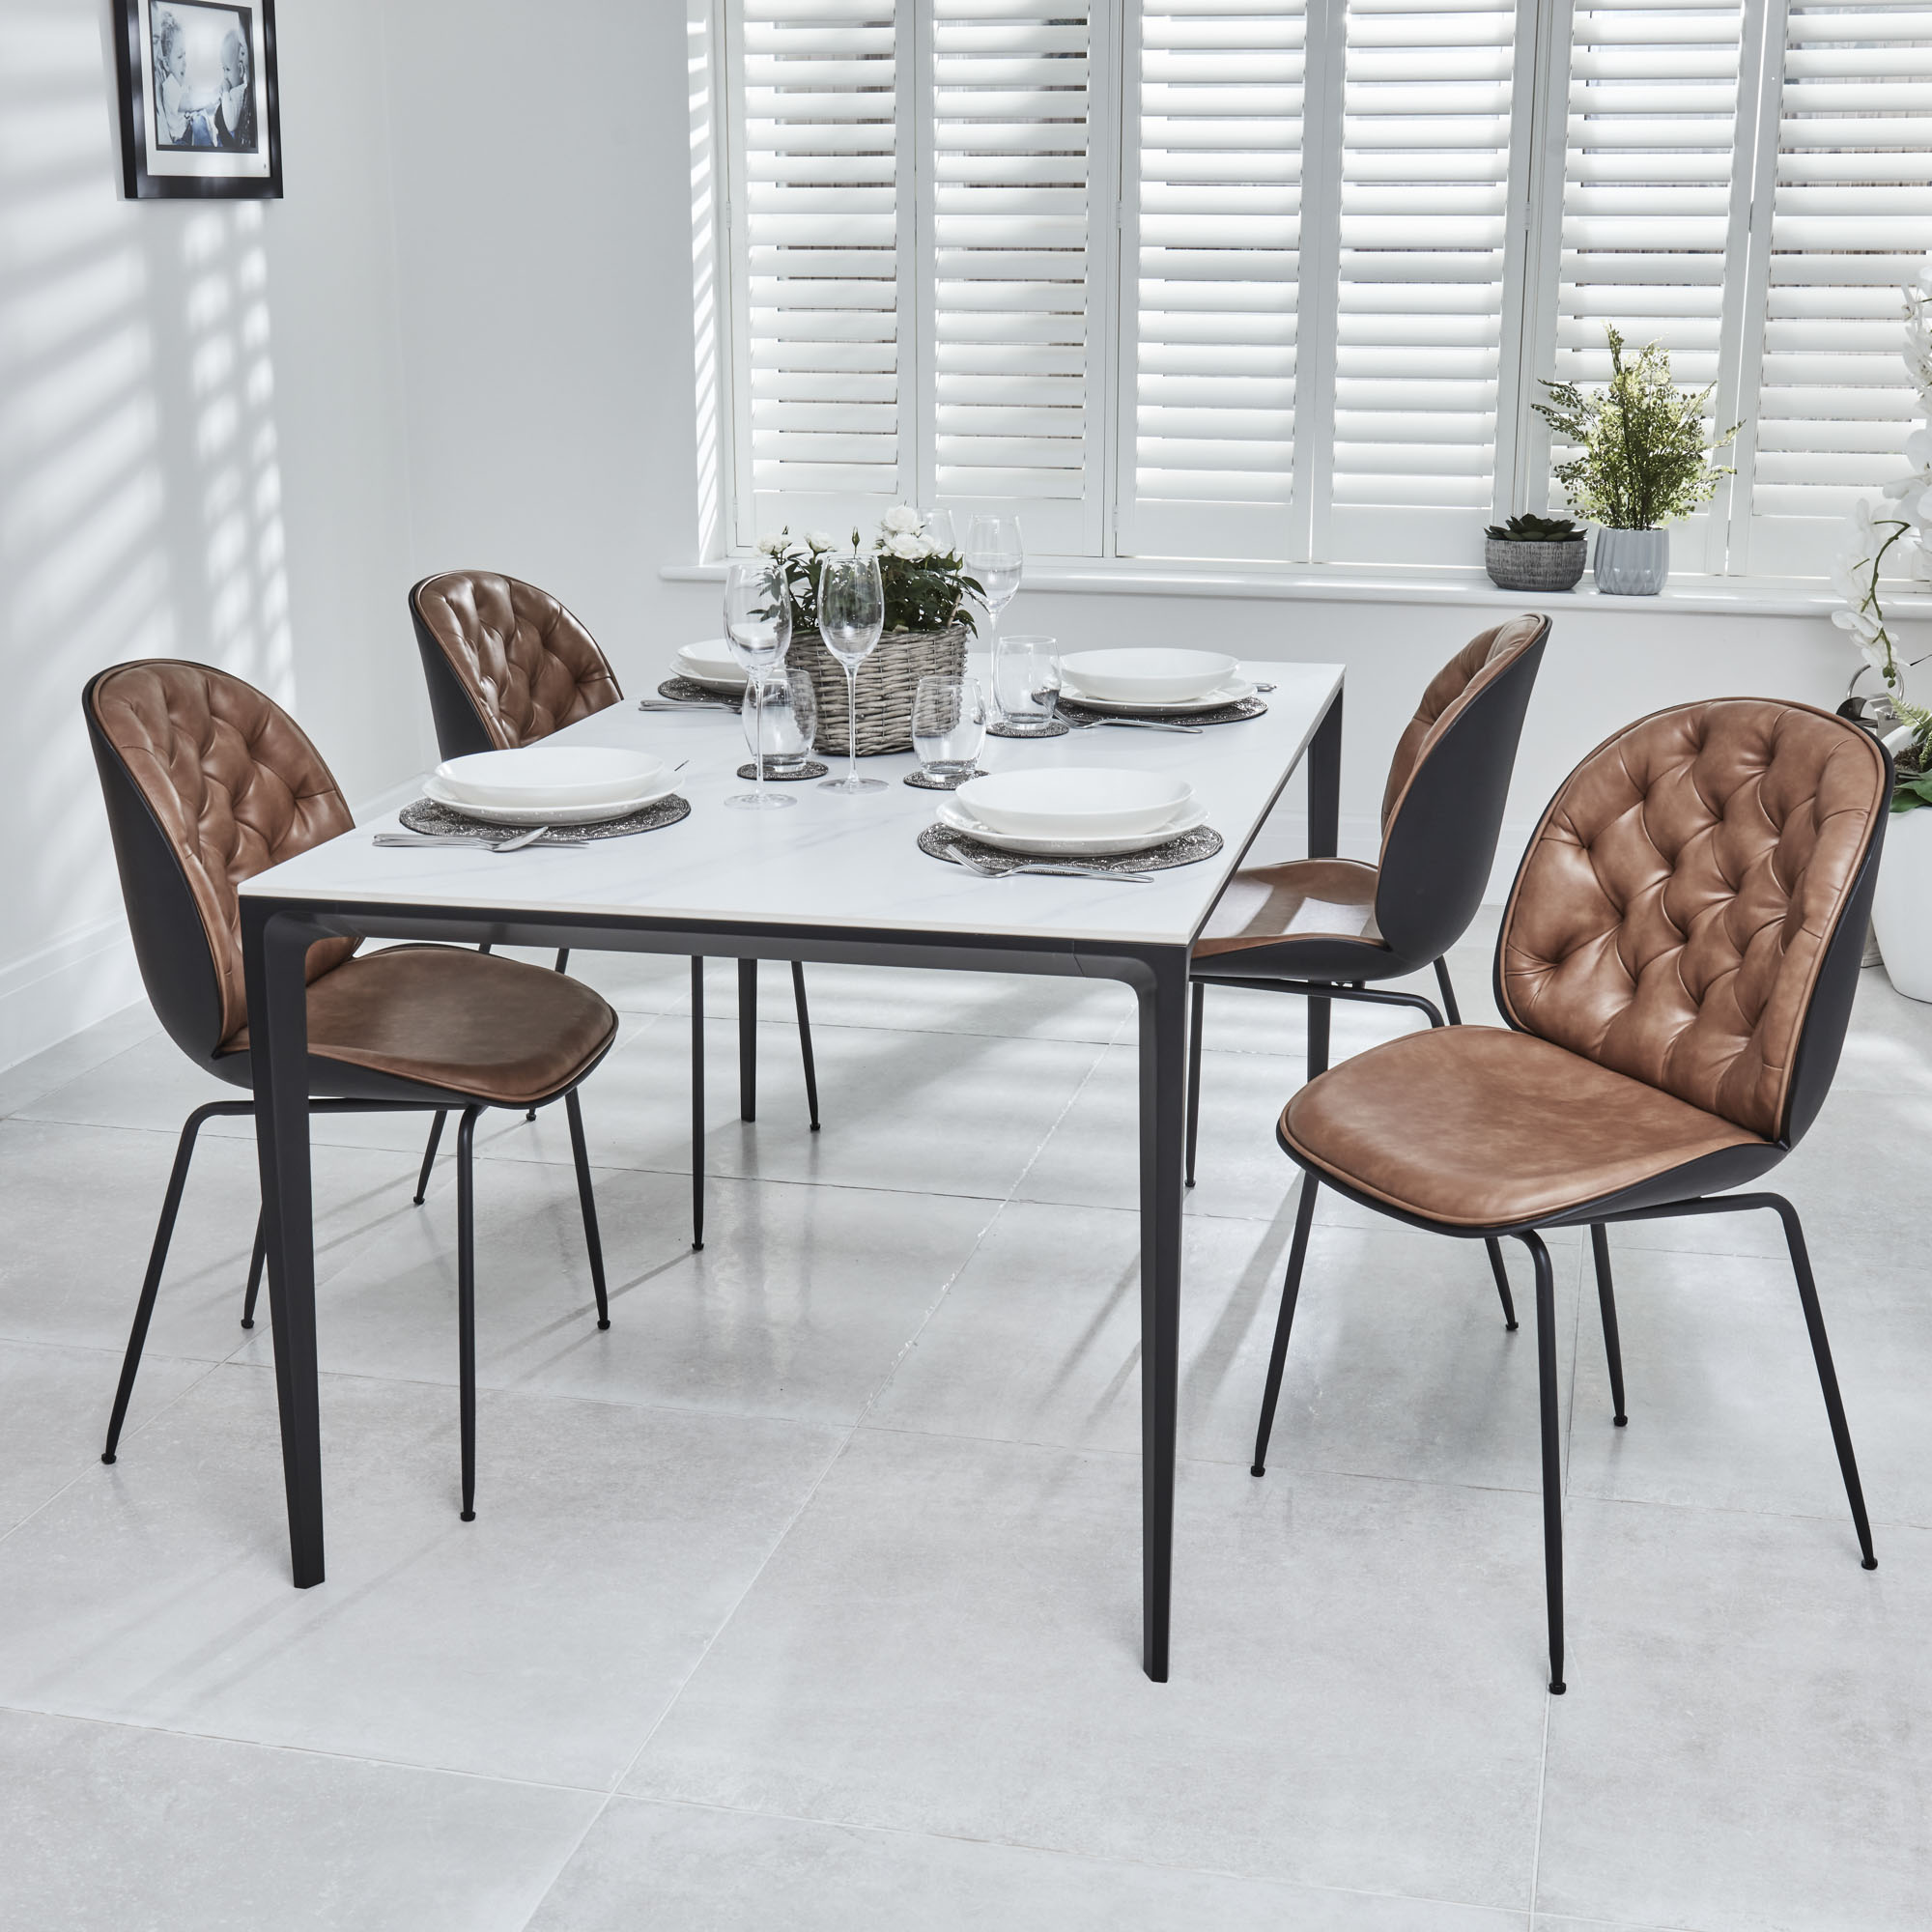 Bellagio 160cm White Sintered Stone Dining Table with Black Contemporary Base